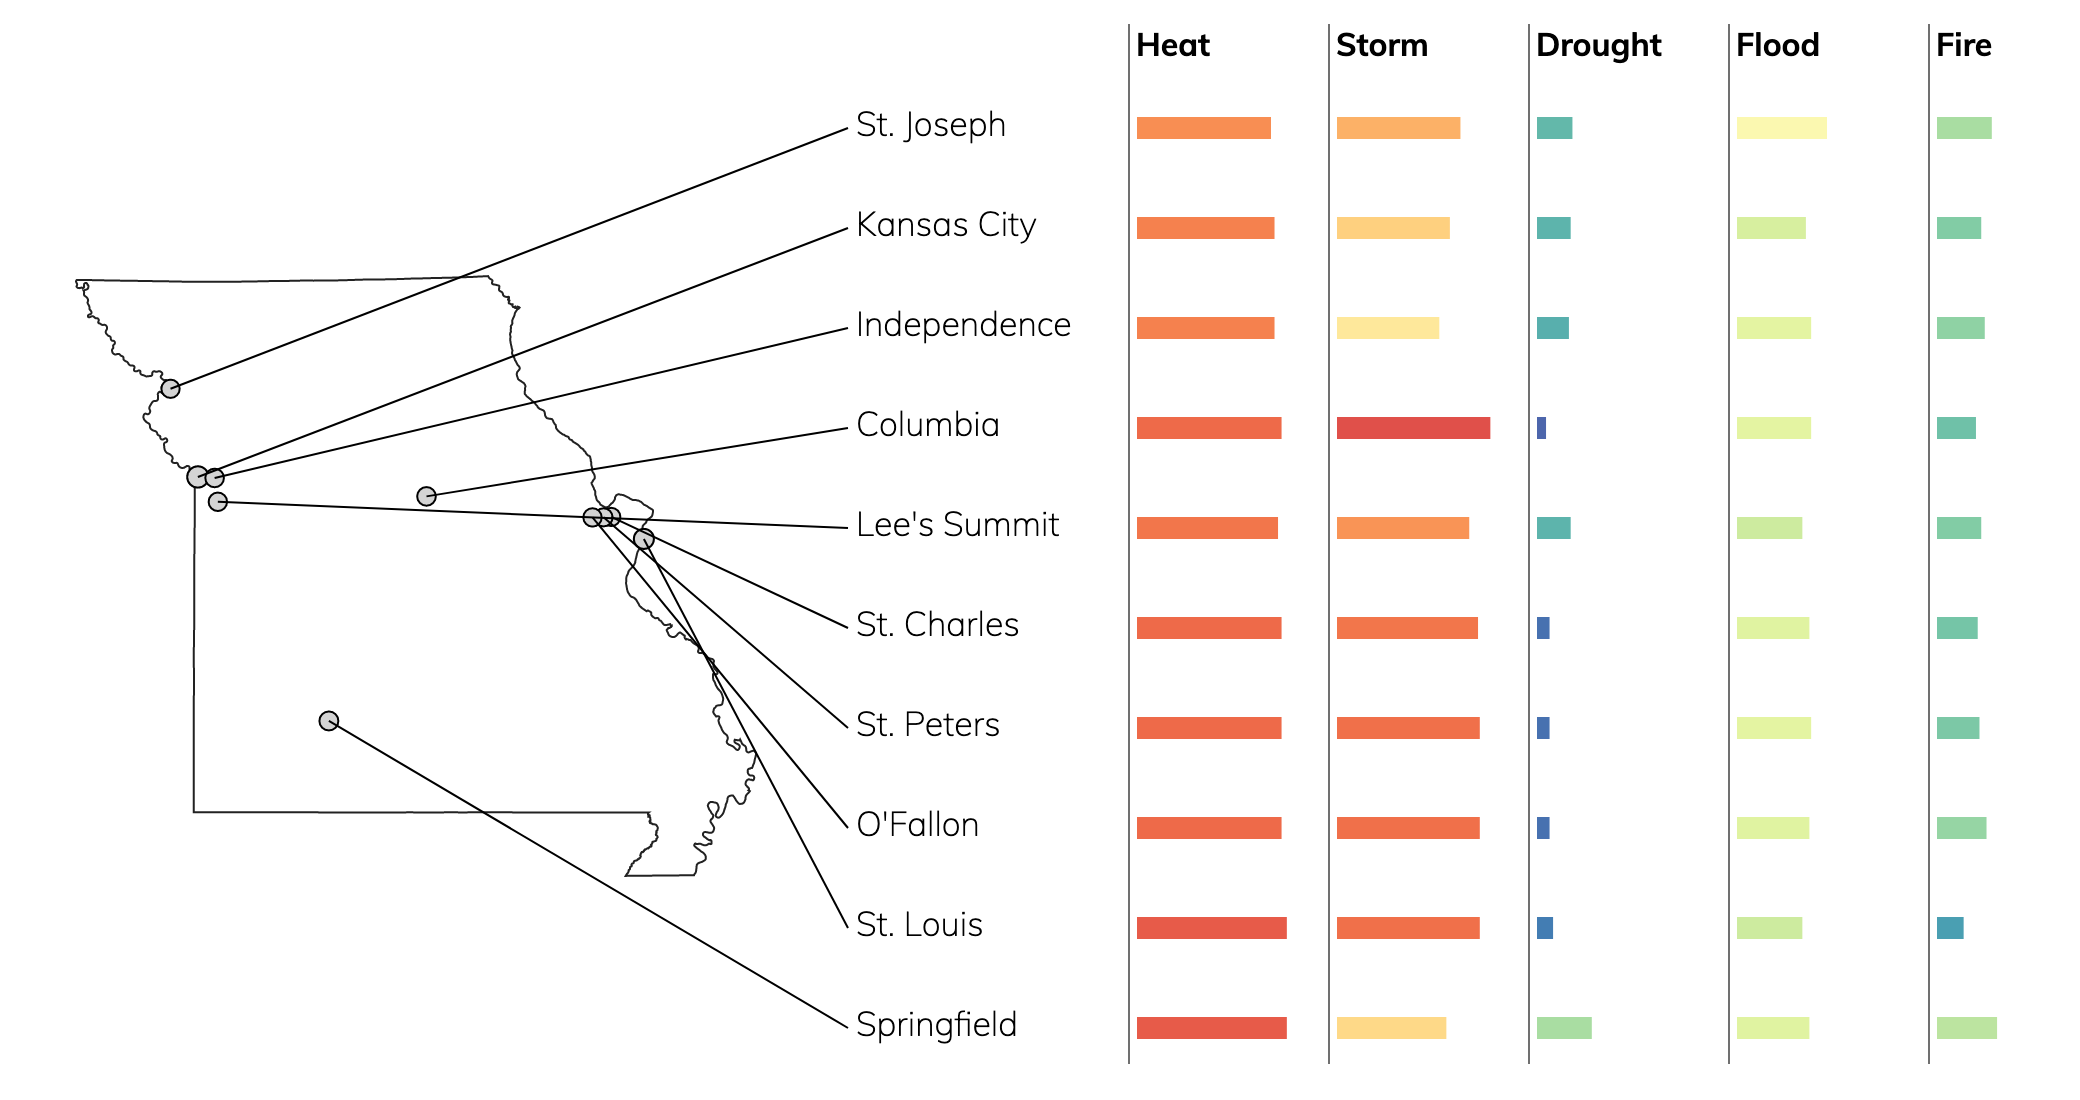 Climate Change Risk Ratings for Cities in Missouri